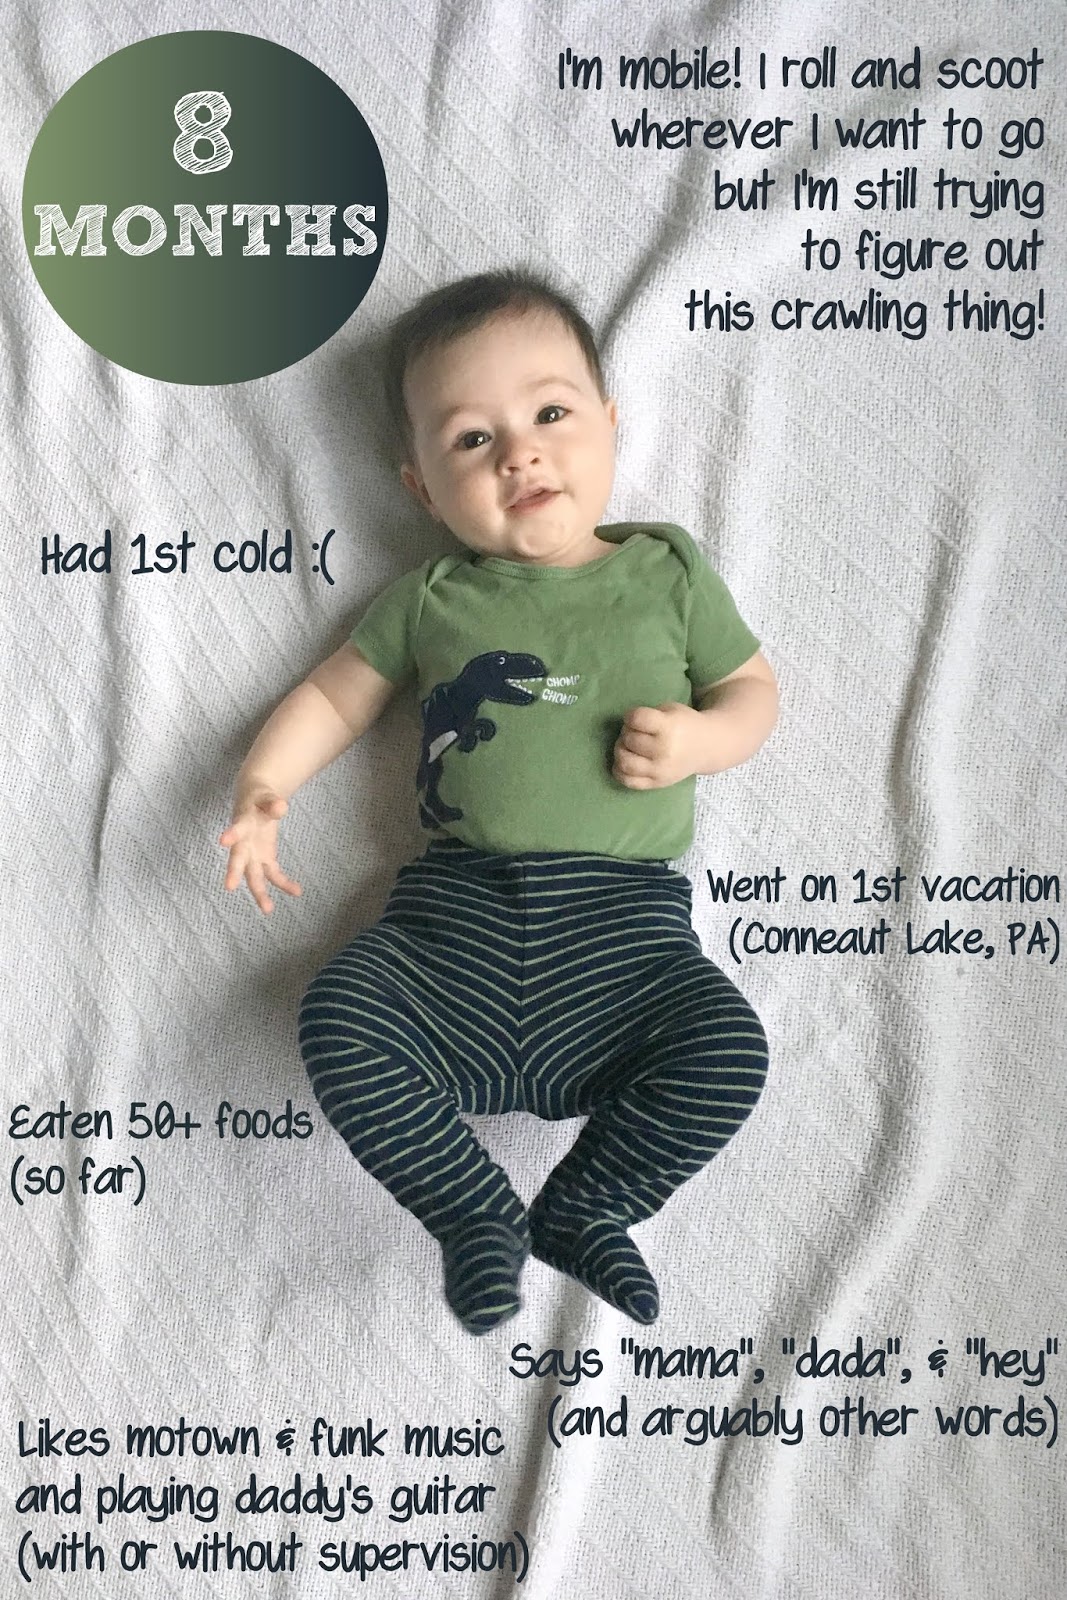 The Cooking Actress: James-8 Months!